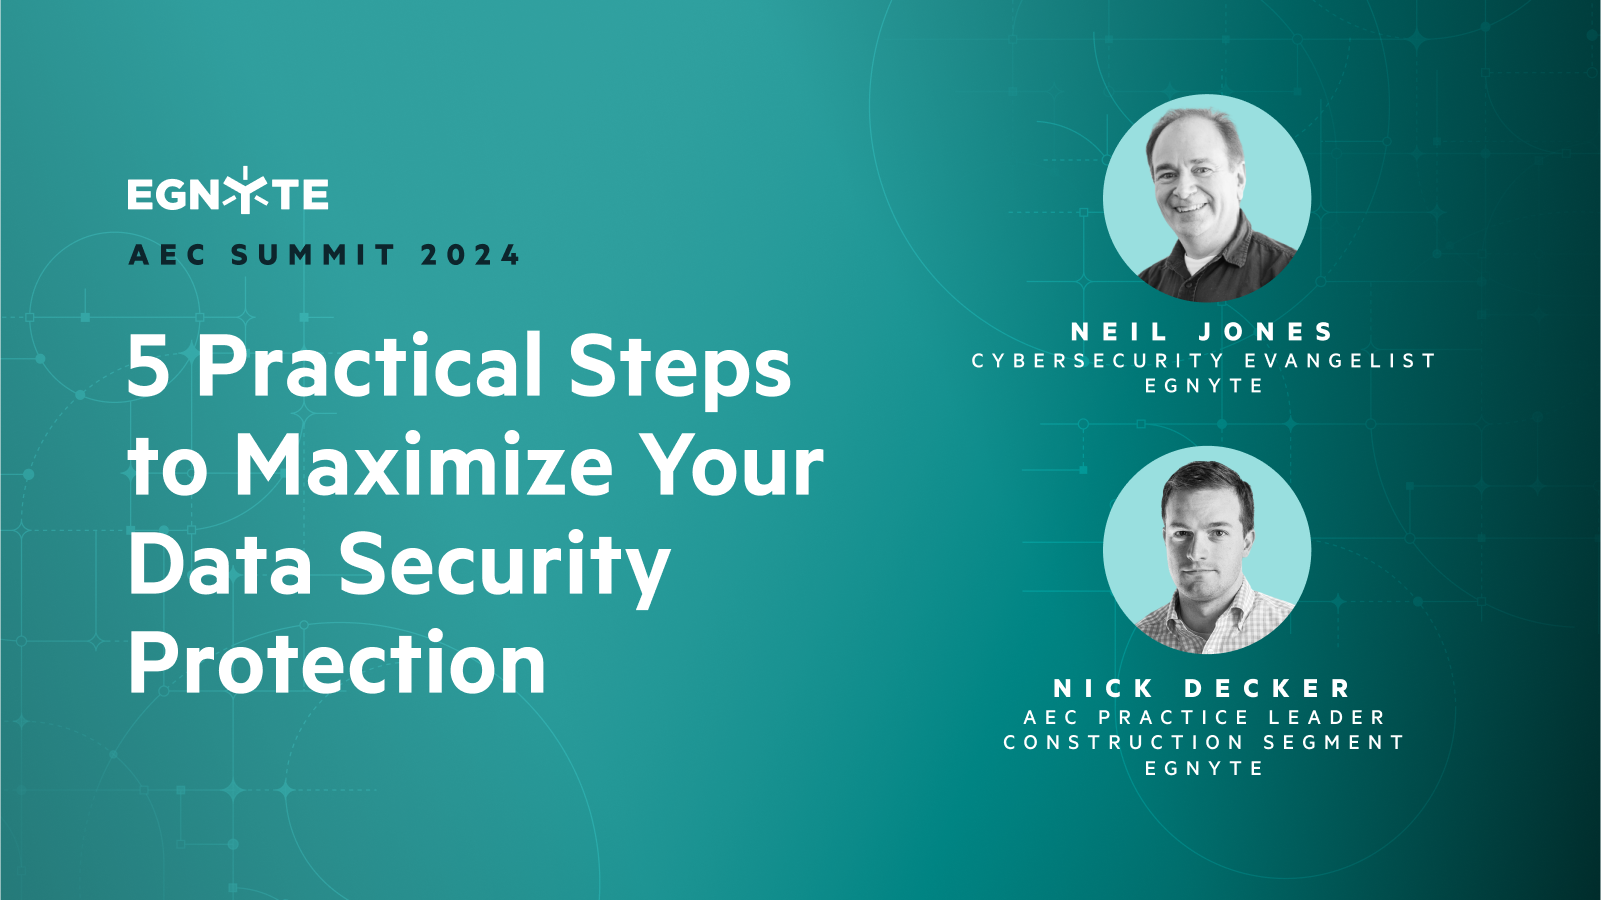 5 Practical Steps to Maximize Your Data Security Protection